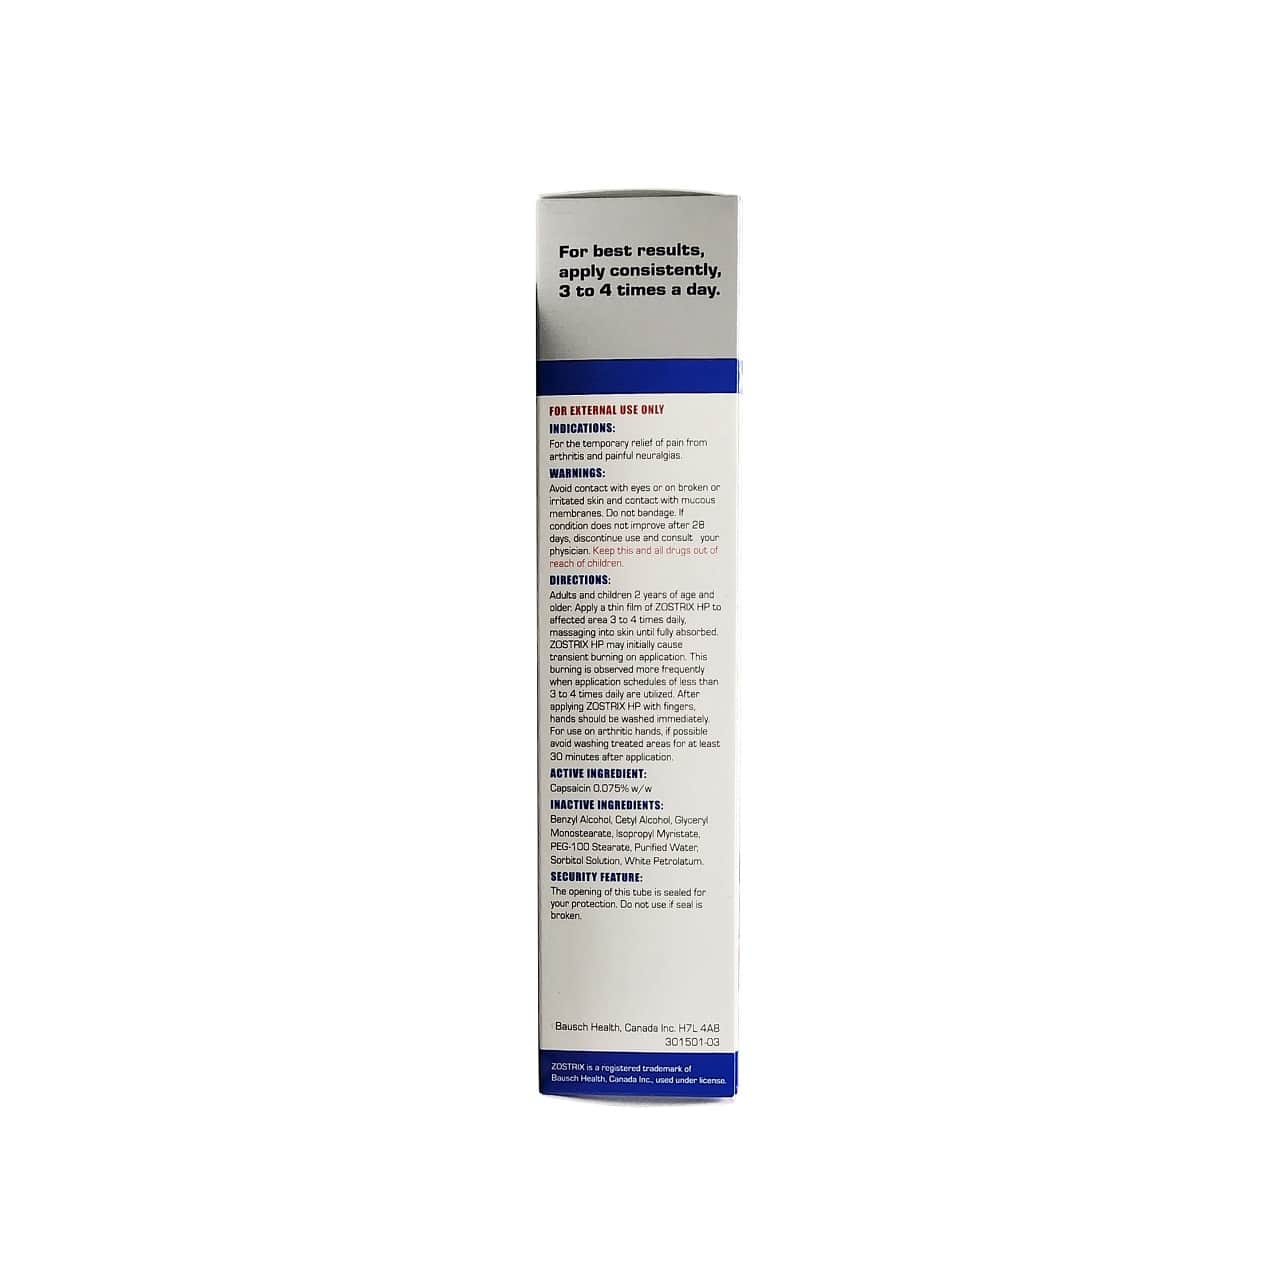 Indications, warnings, directions, ingredients for Zostrix HP Topical Analgesic Cream (60 grams) in English